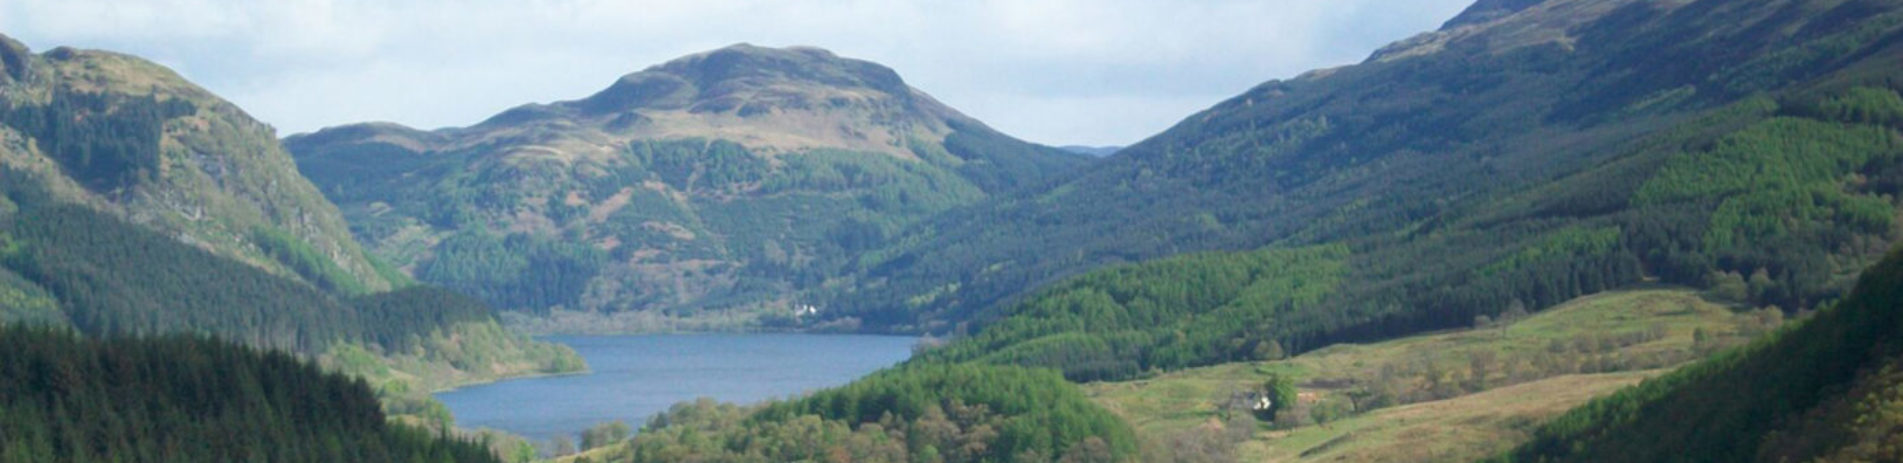 callander-pass-landscape-of-forested-hills-surrounding-loch-lubnaig-in-the-middle